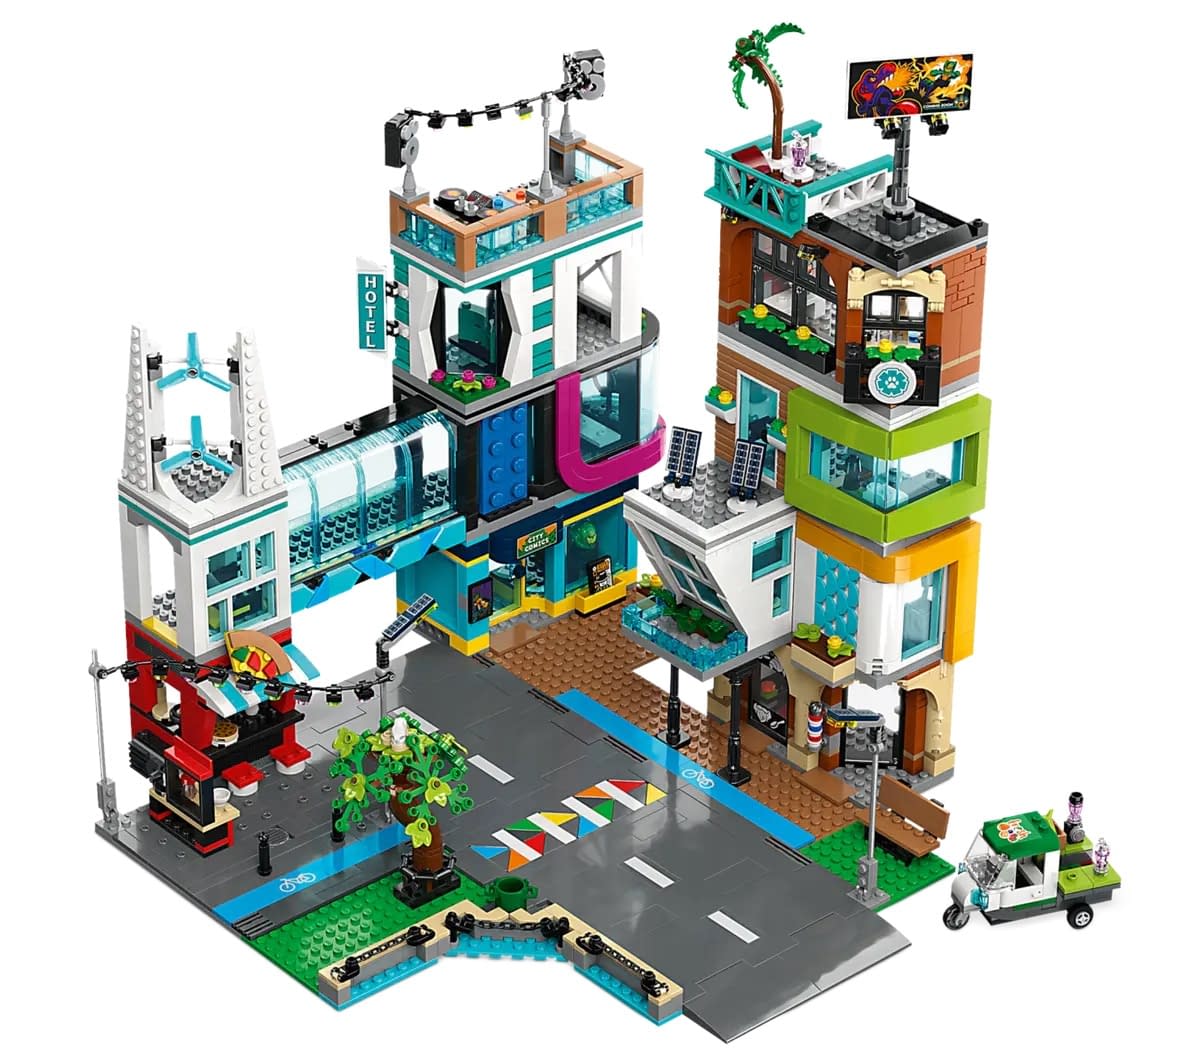 virkningsfuldhed Glad vente Explore Downtown as LEGO Debuts Their Latest LEGO City Set